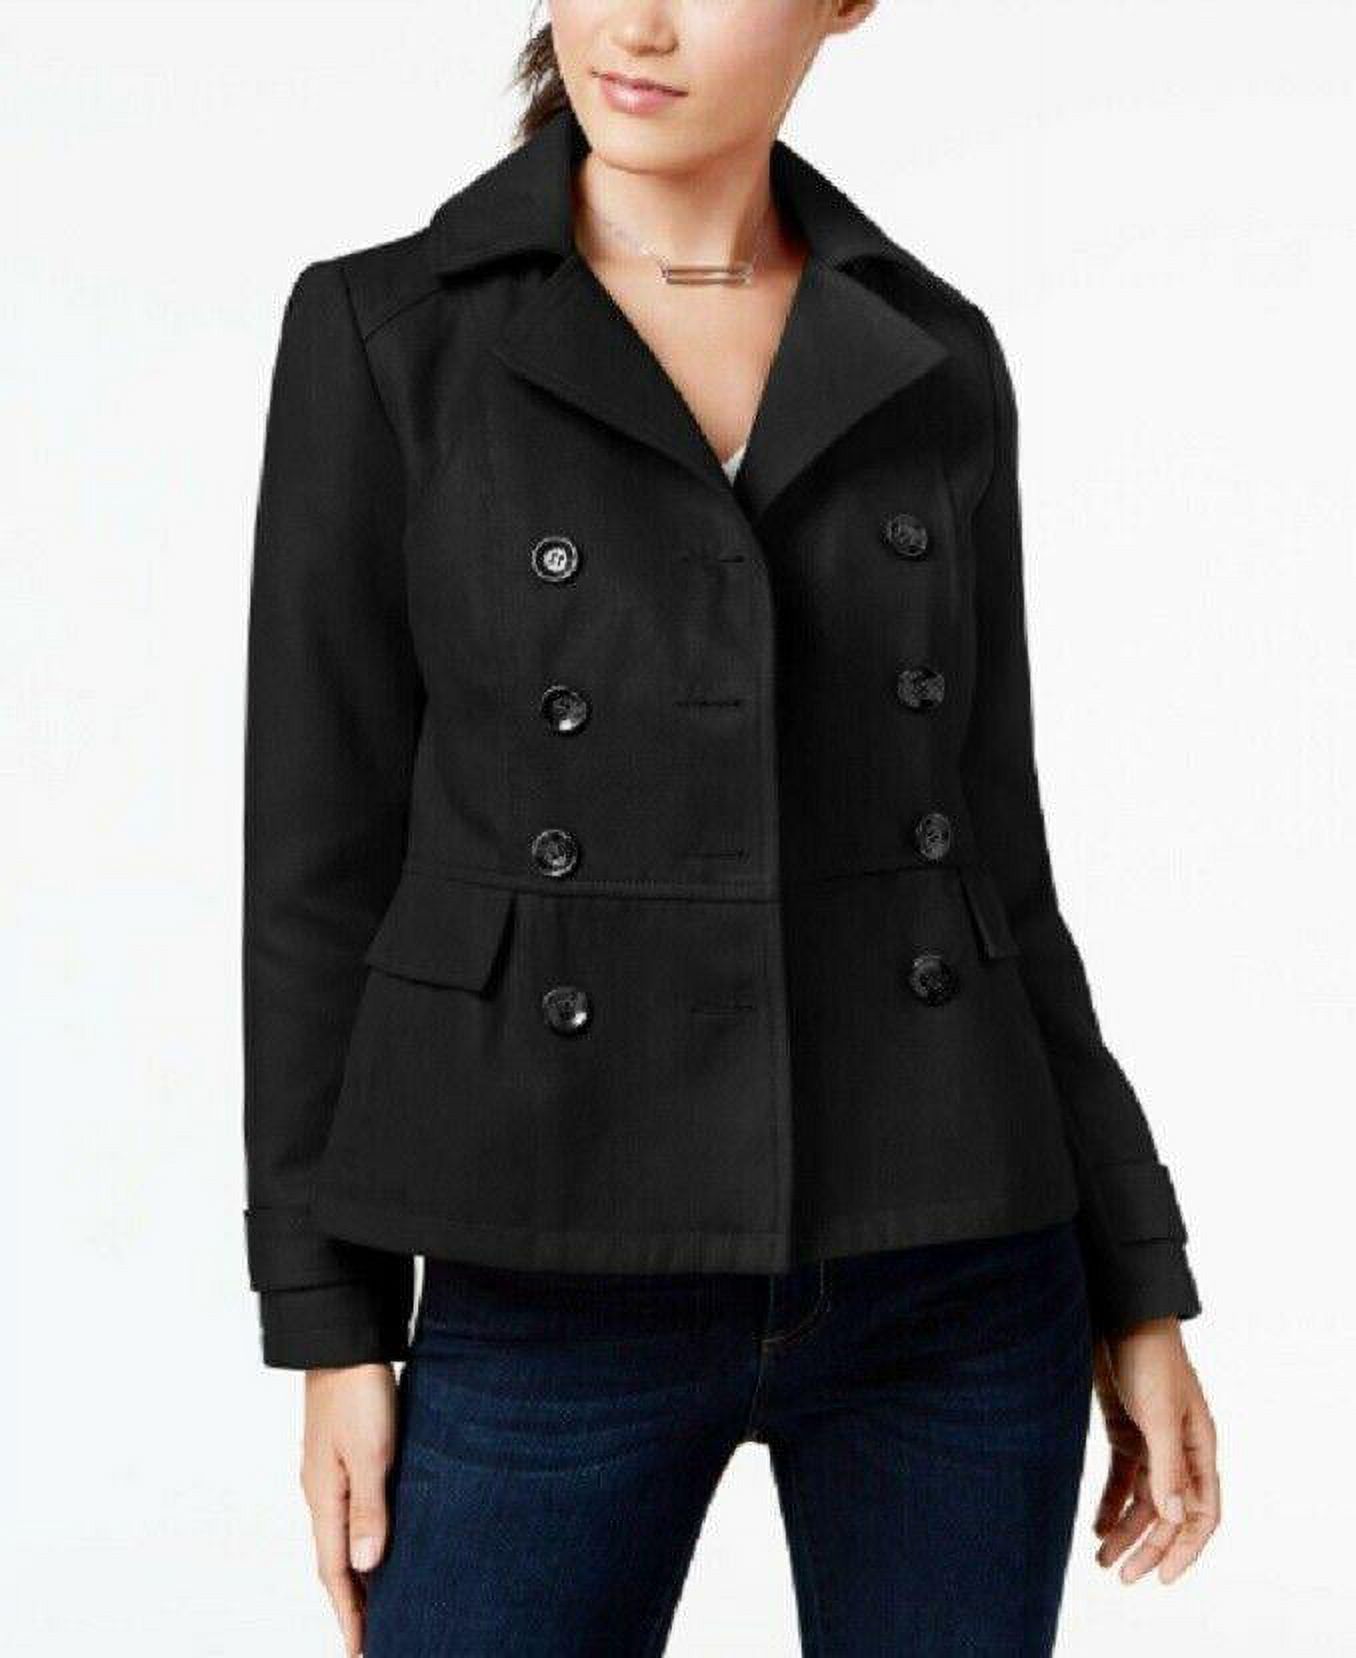 New Celebrity PINK Women's Black Double Breasted PeaCoat Hooded Jacket Size S - image 1 of 2